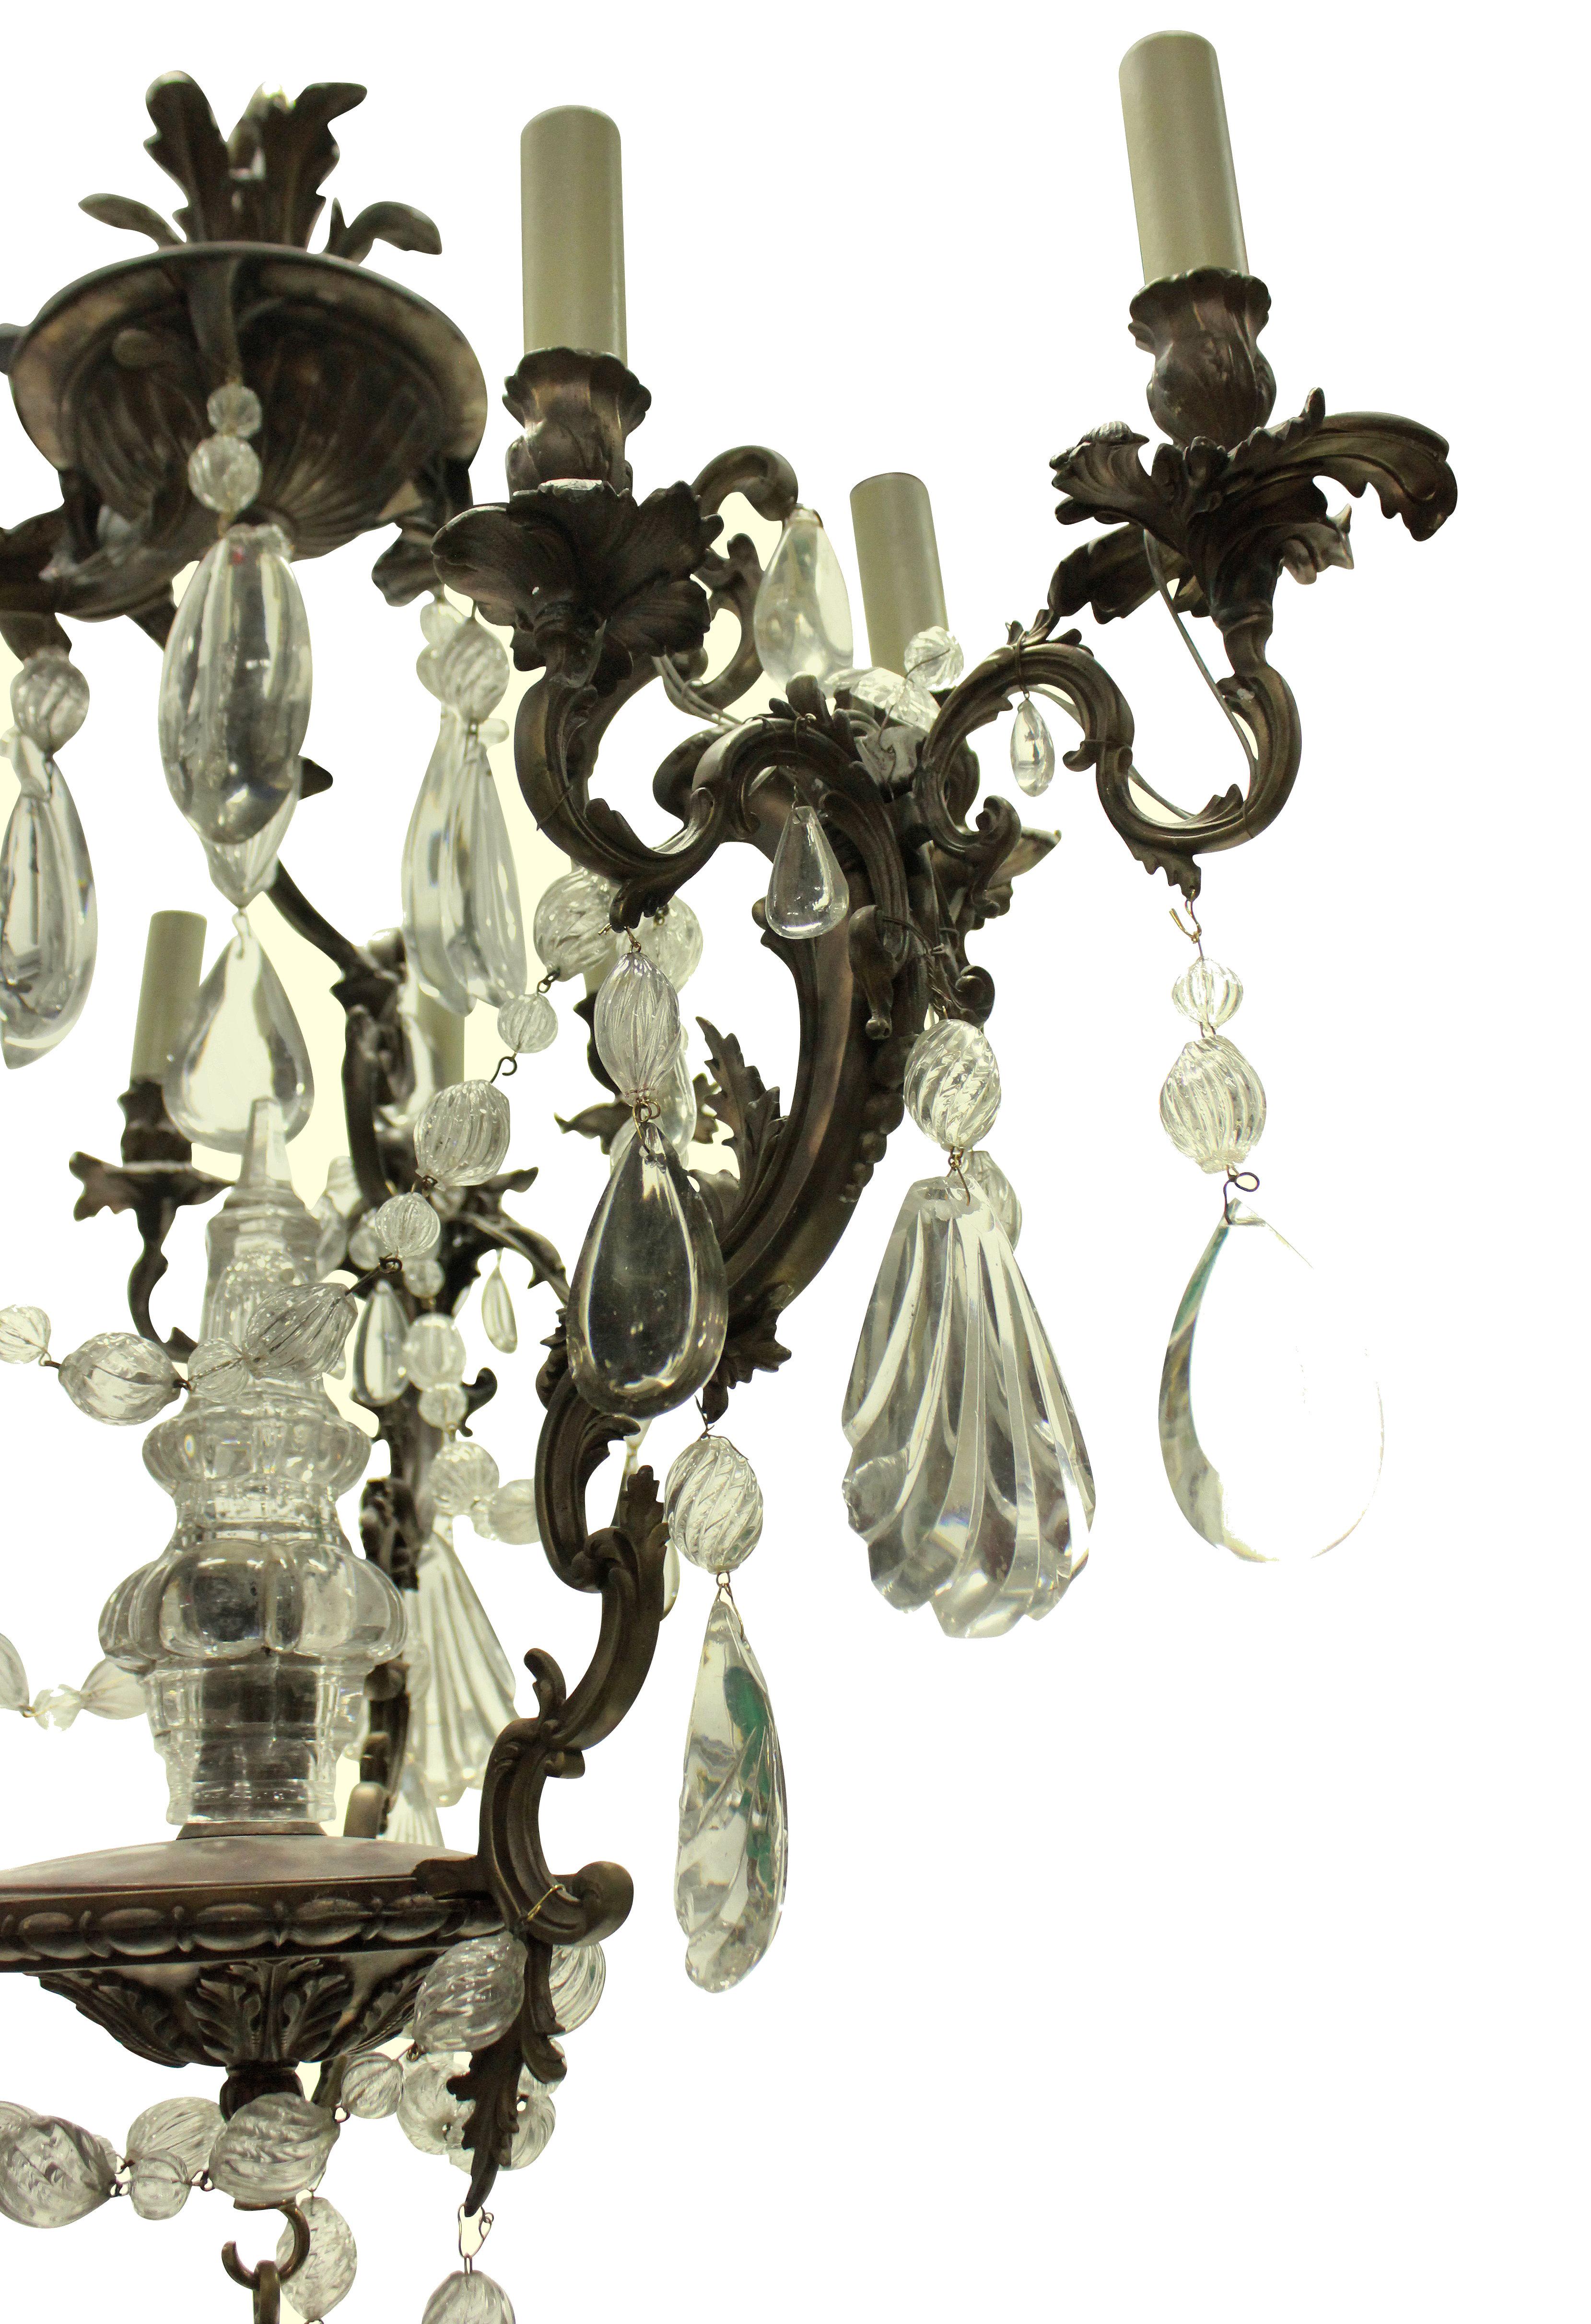 A French Rococo bronze chandelier hung throughout with interesting cut and blown glass drops and swags, with a central spire.